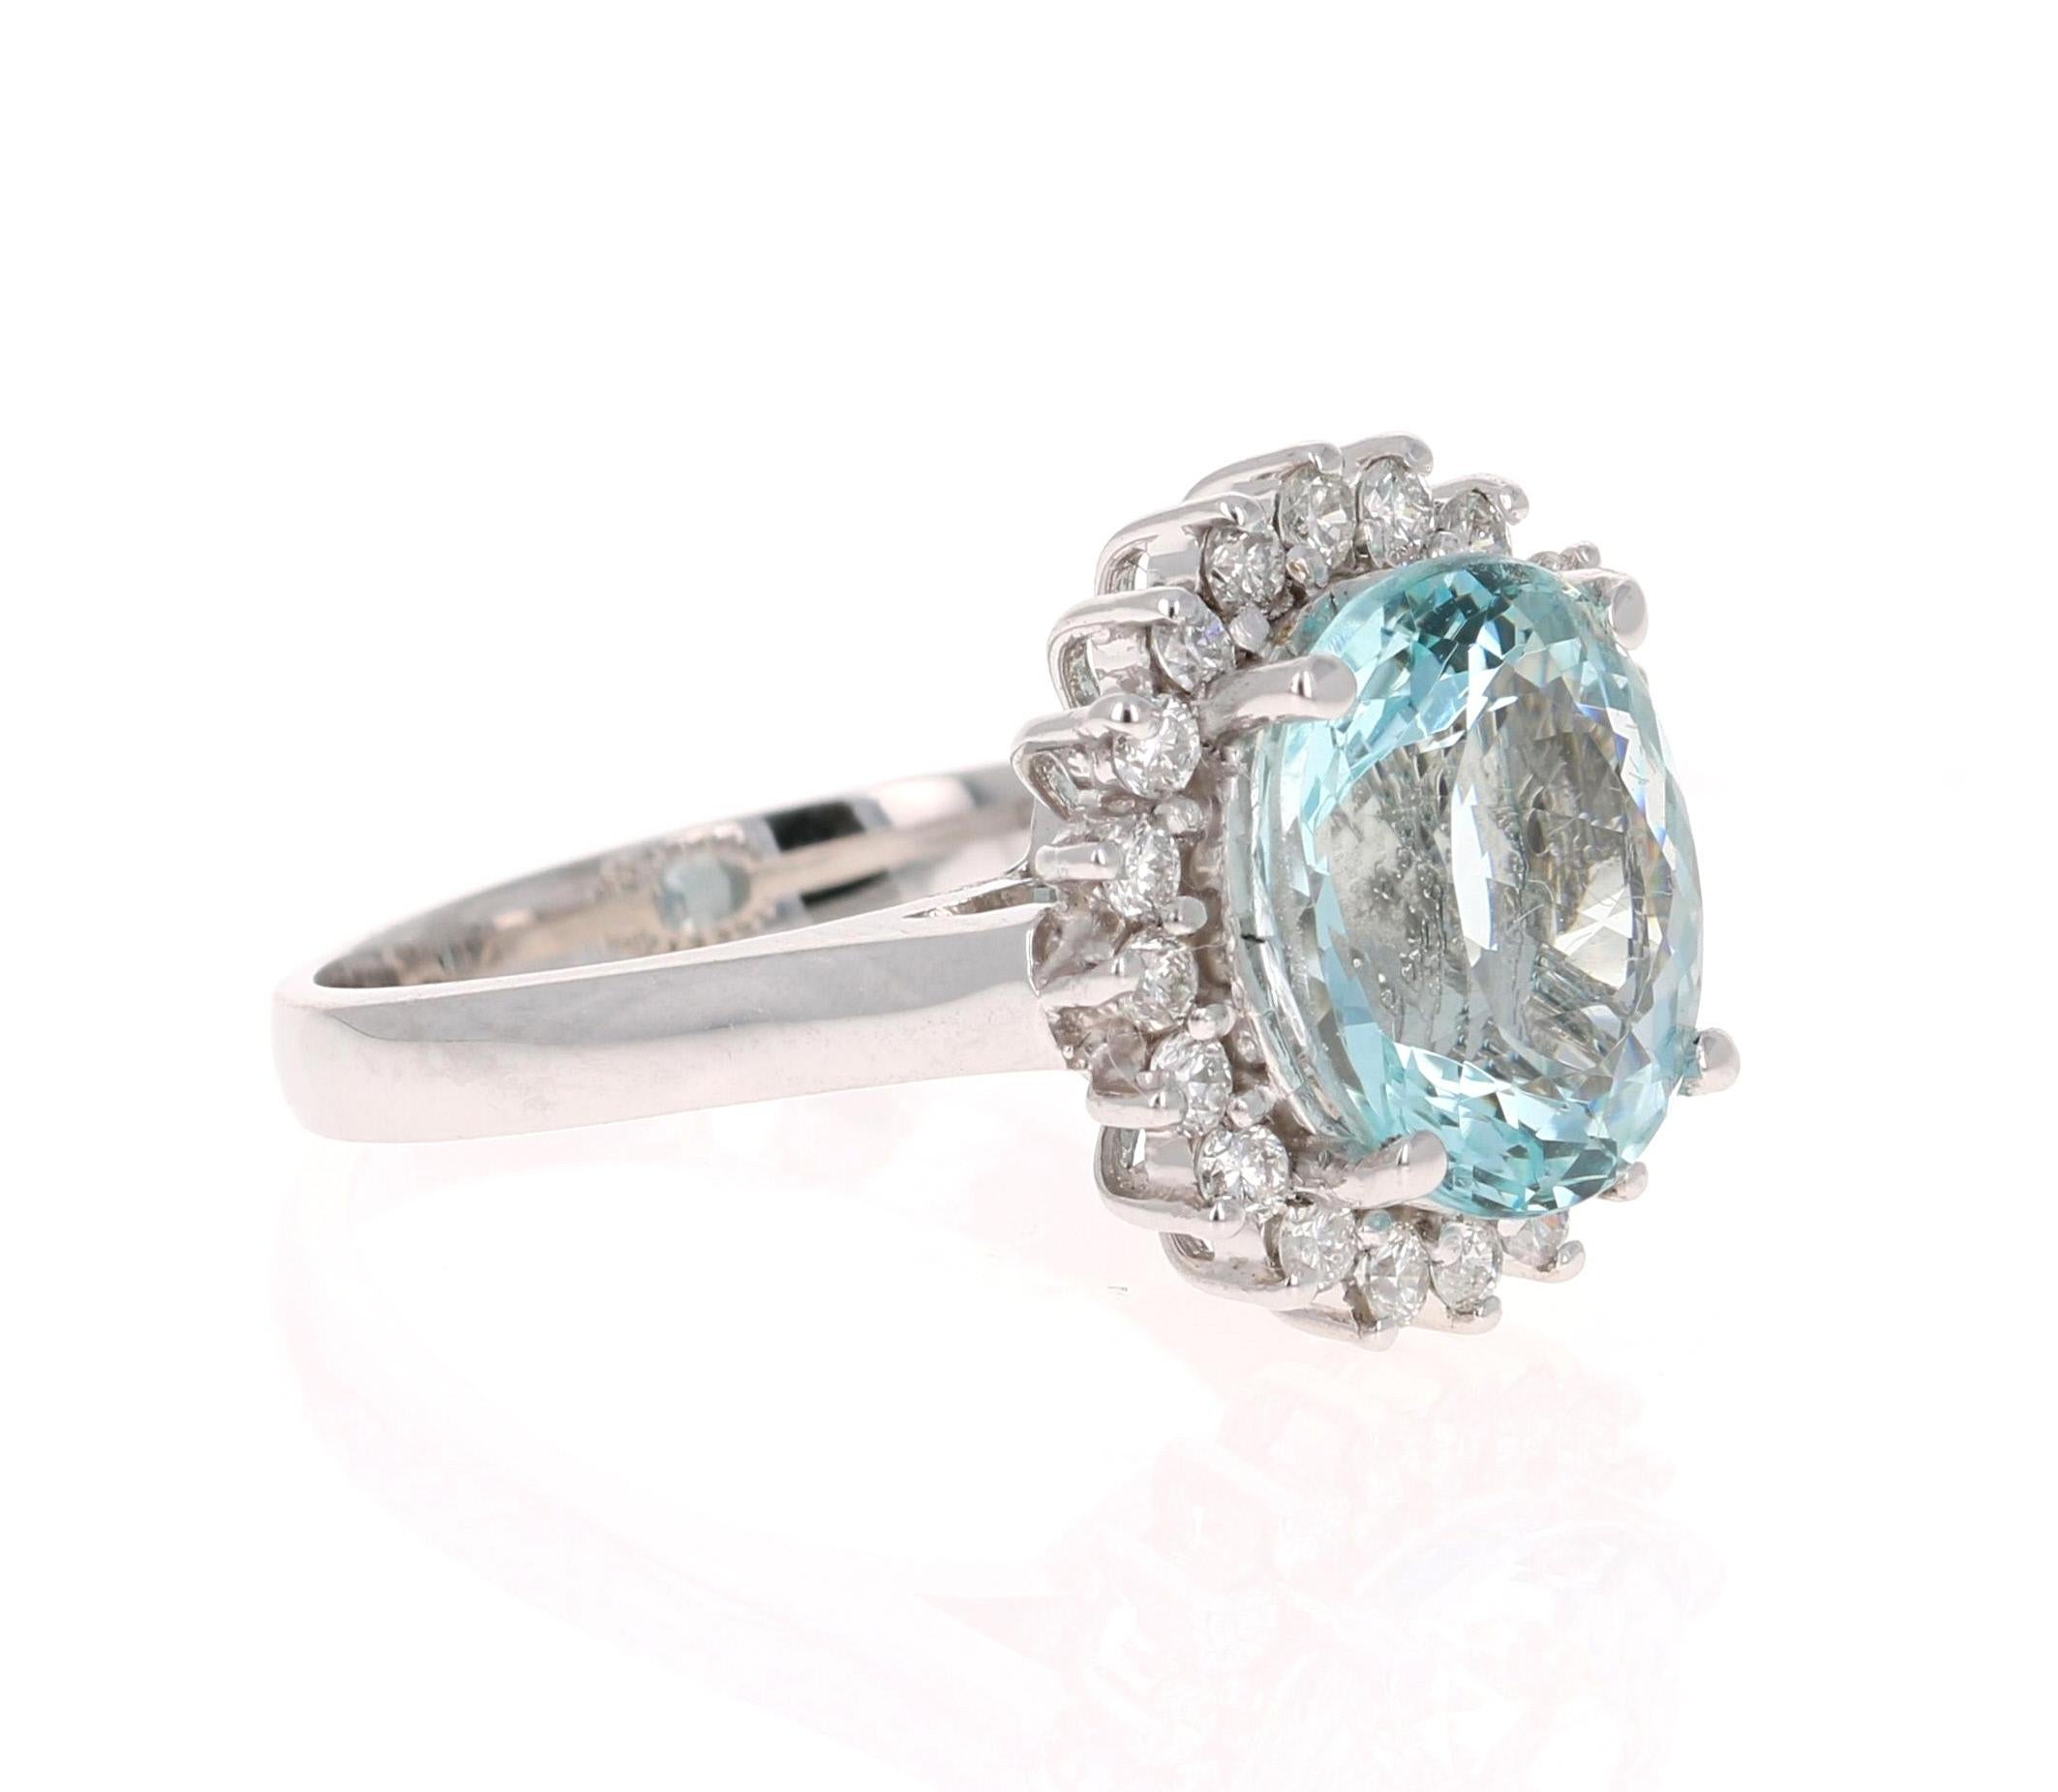 This ring has a beautiful 4.07 Carat Oval Cut Aquamarine and is surrounded by 20 Round Cut Diamonds that weigh 0.52 carat (Clarity: SI, Color: F). The total carat weight of this ring is 4.59 Carats. 

The ring is made in 14K White Gold and weighs